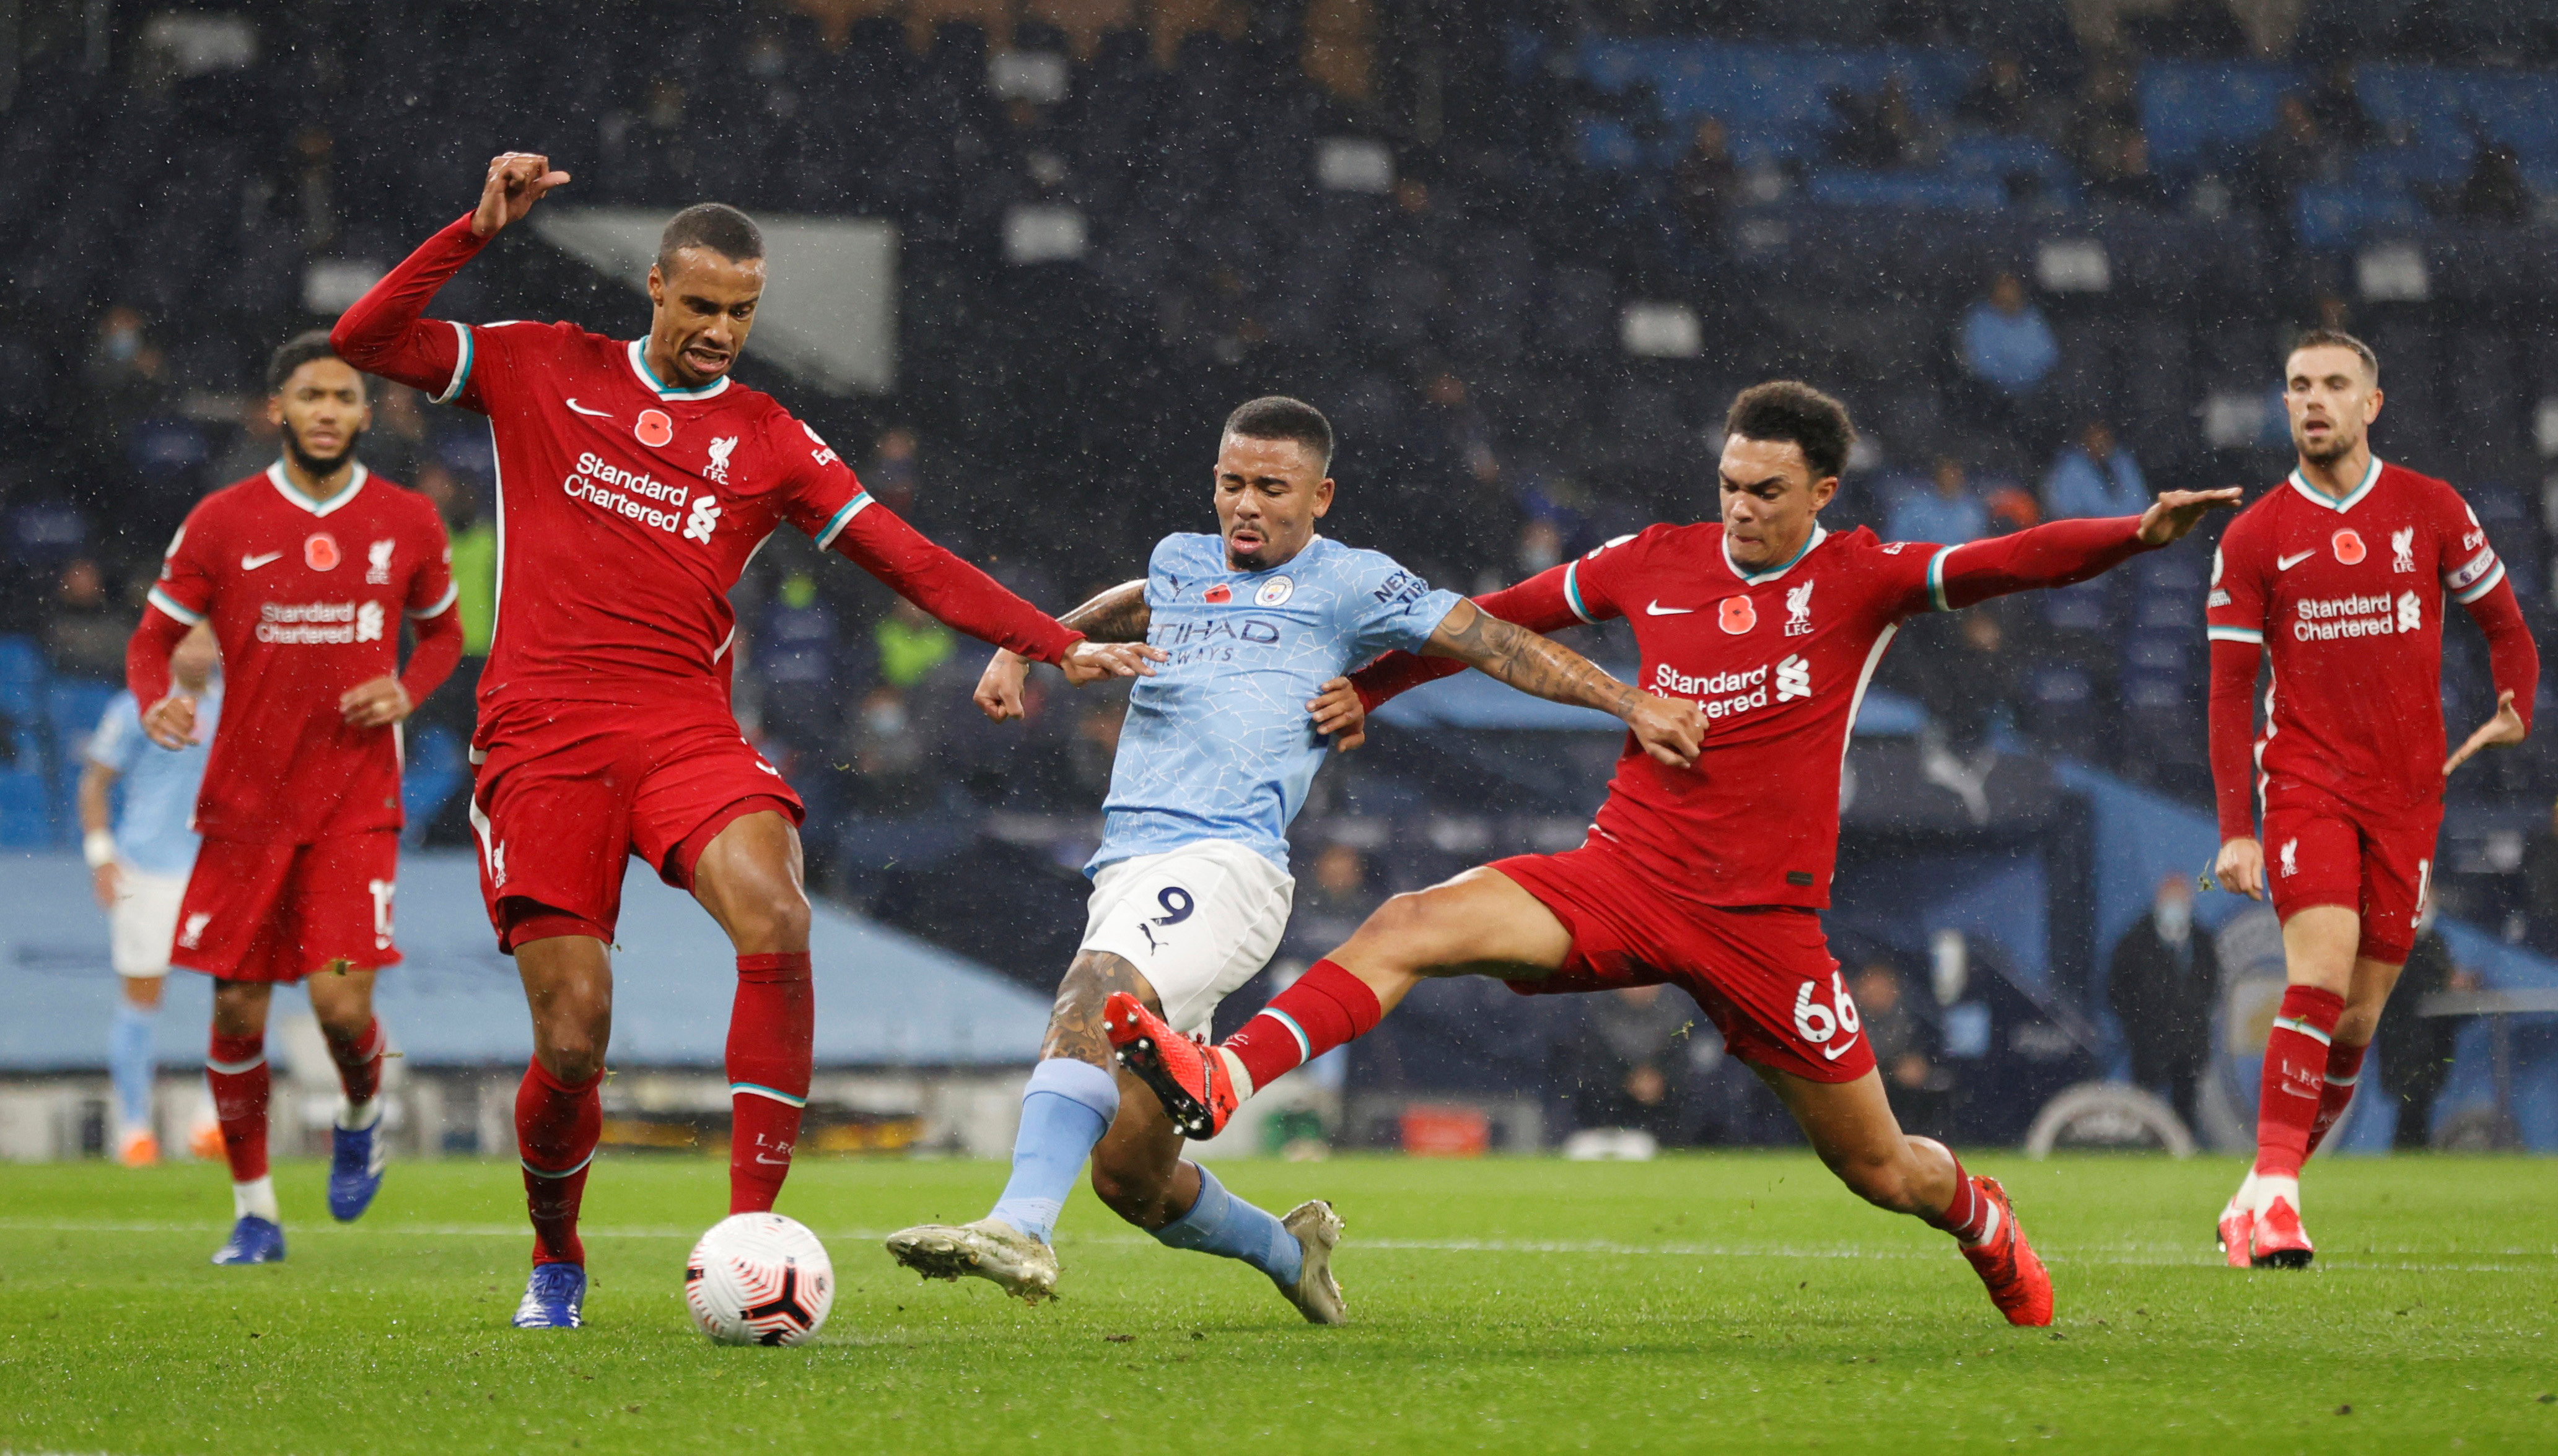 Manchester City's Gabriel Jesus scores their first goal  during the Premier League match between Manchester City and Liverpool, at Etihad Stadium, in  Manchester, Britain, on November 8, 2020. Photo: Pool via Reuters